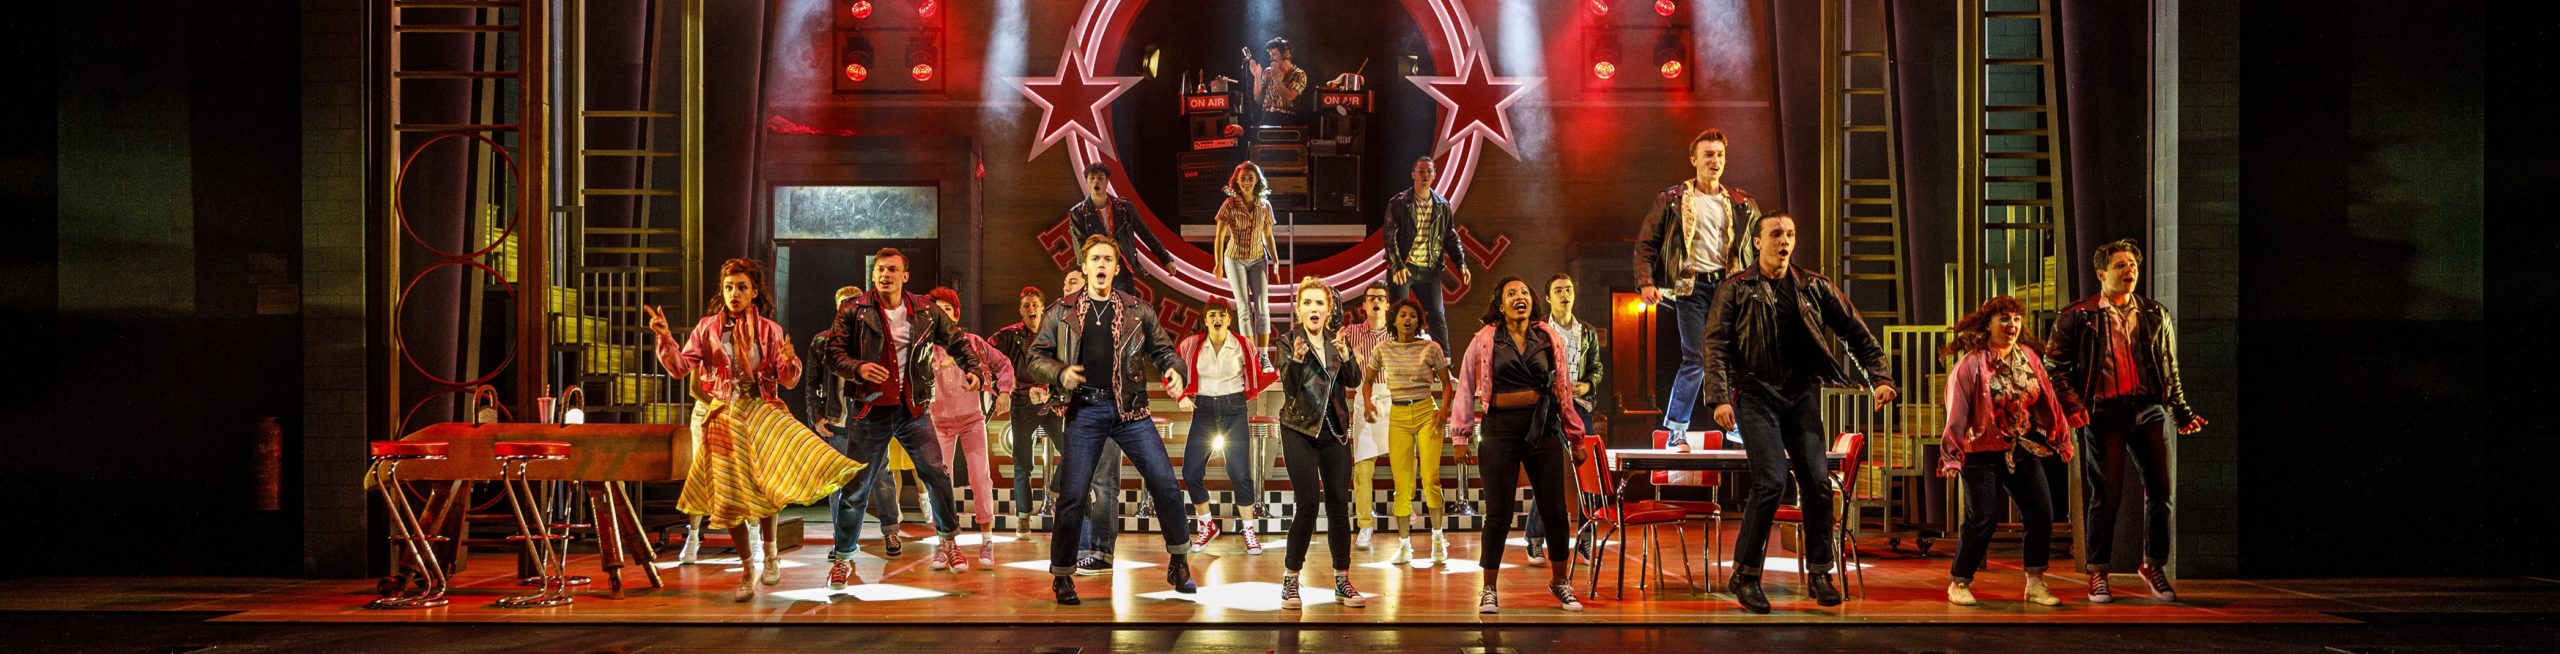 REVIEWED: Grease The Musical